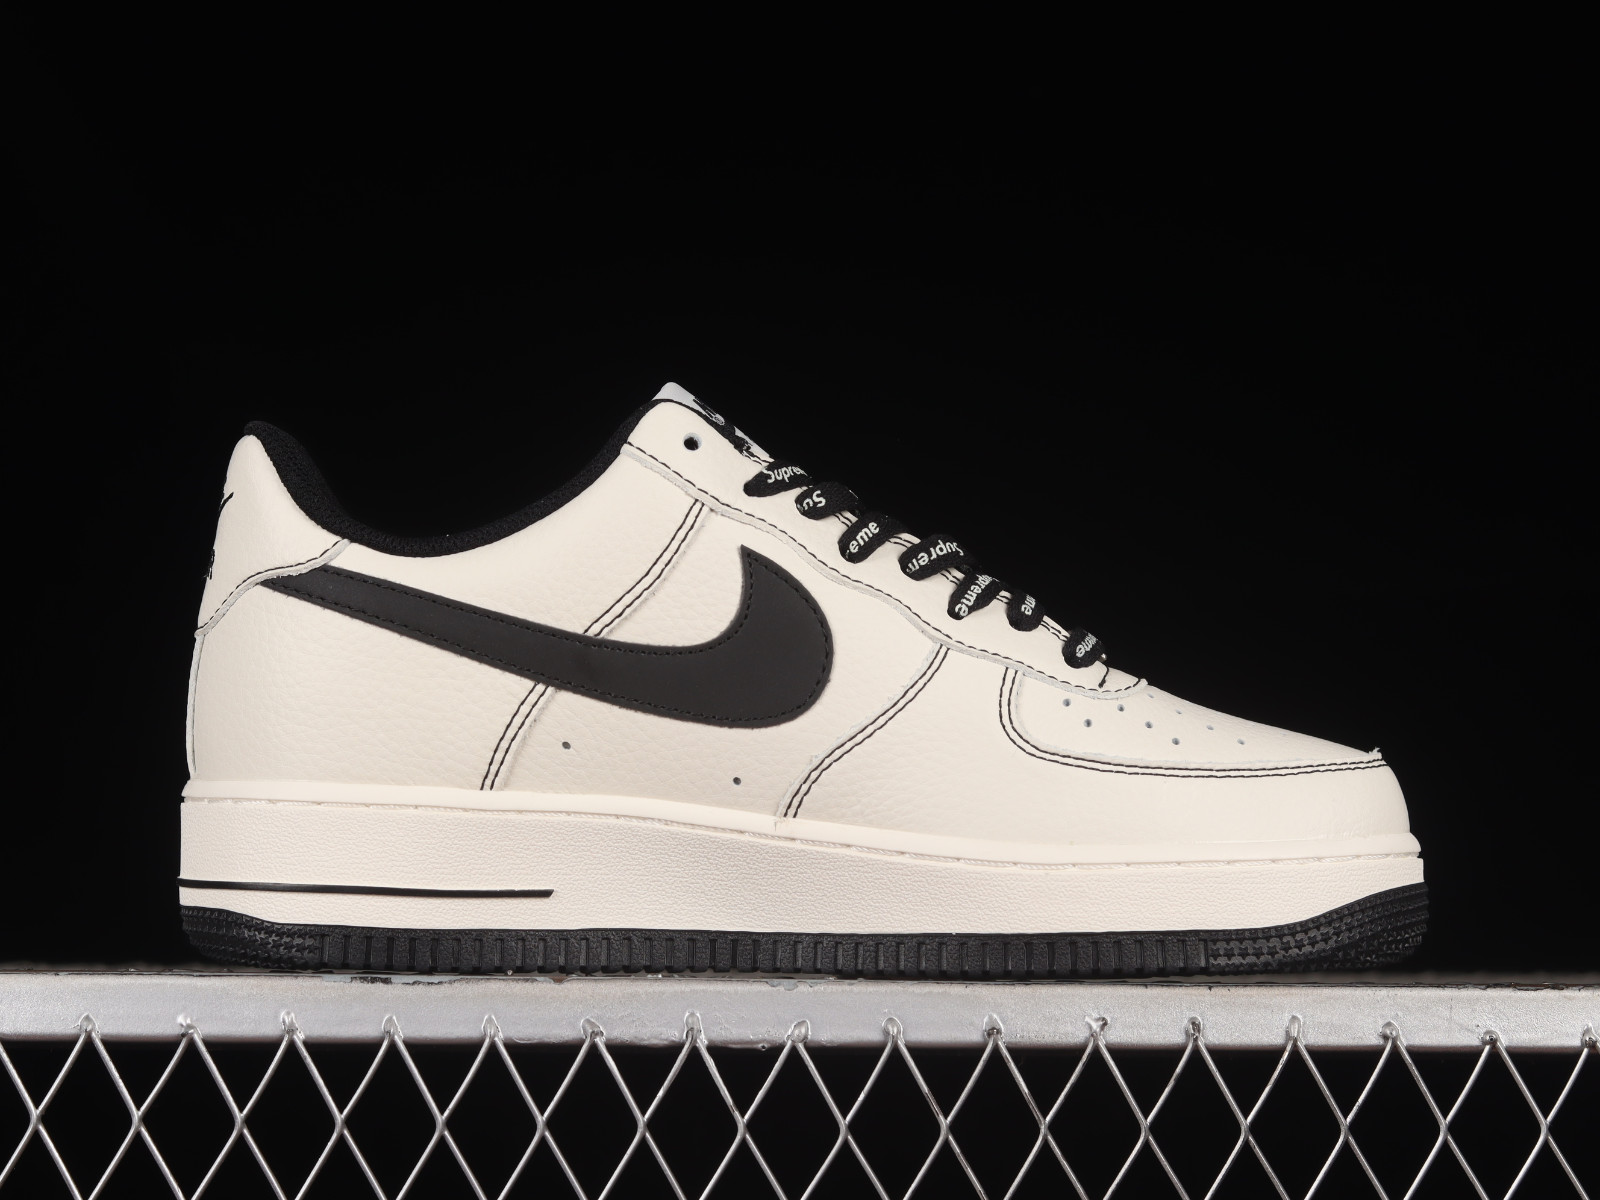 air force white for kids - 003 - Supreme x Nike Air Force 1 07 Low